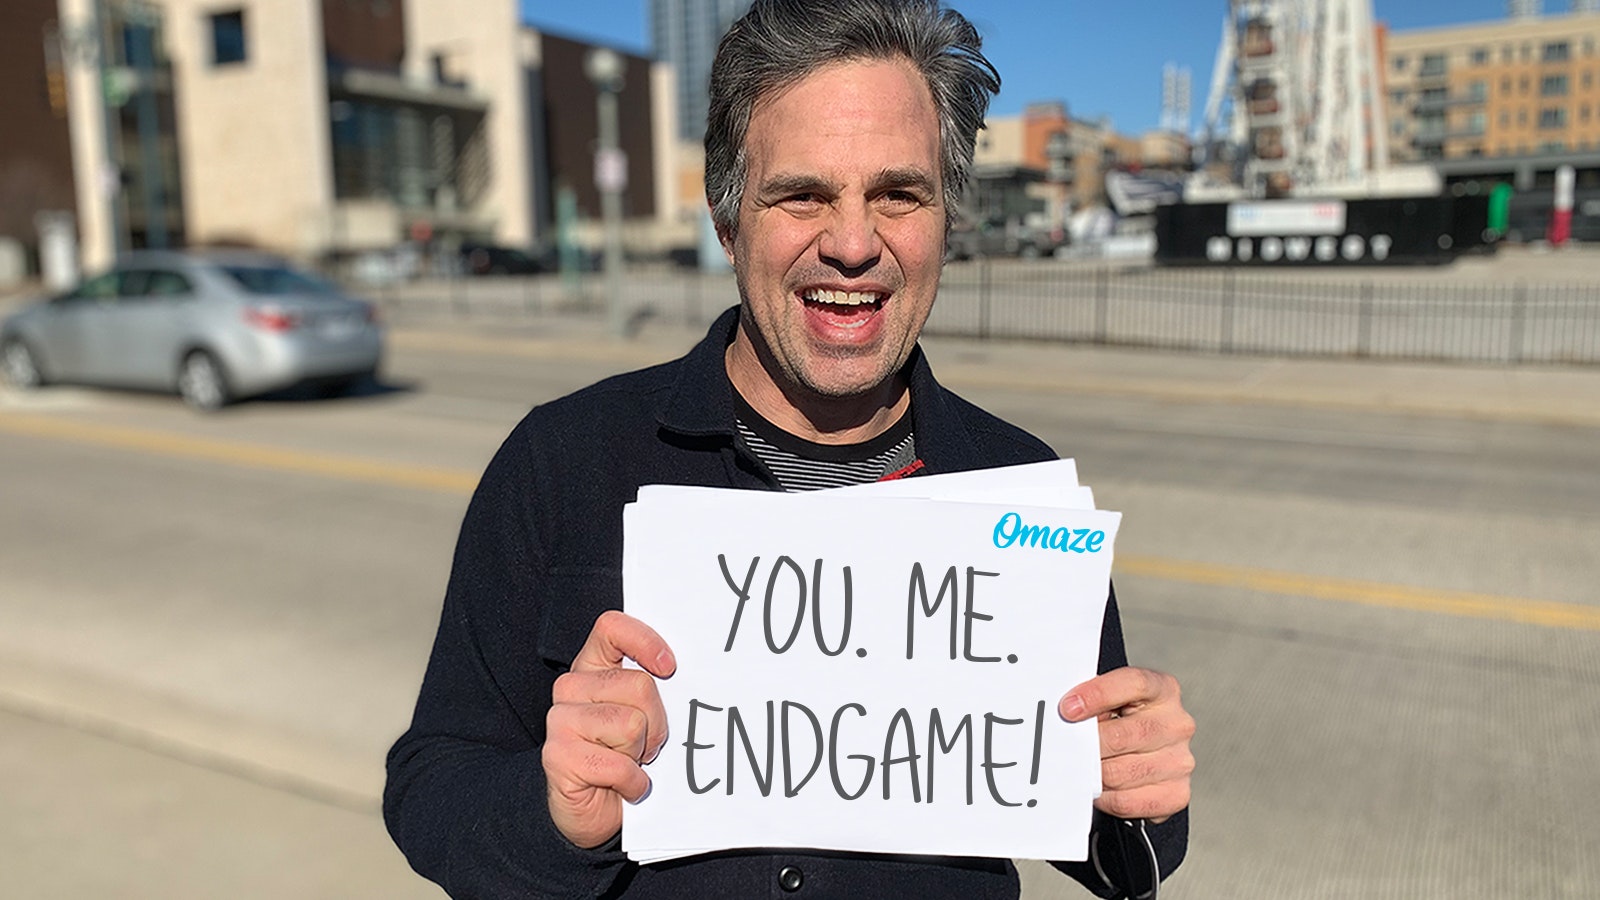 Win The Opportunity to See “Avengers: Endgame” Premiere with Mark Ruffalo